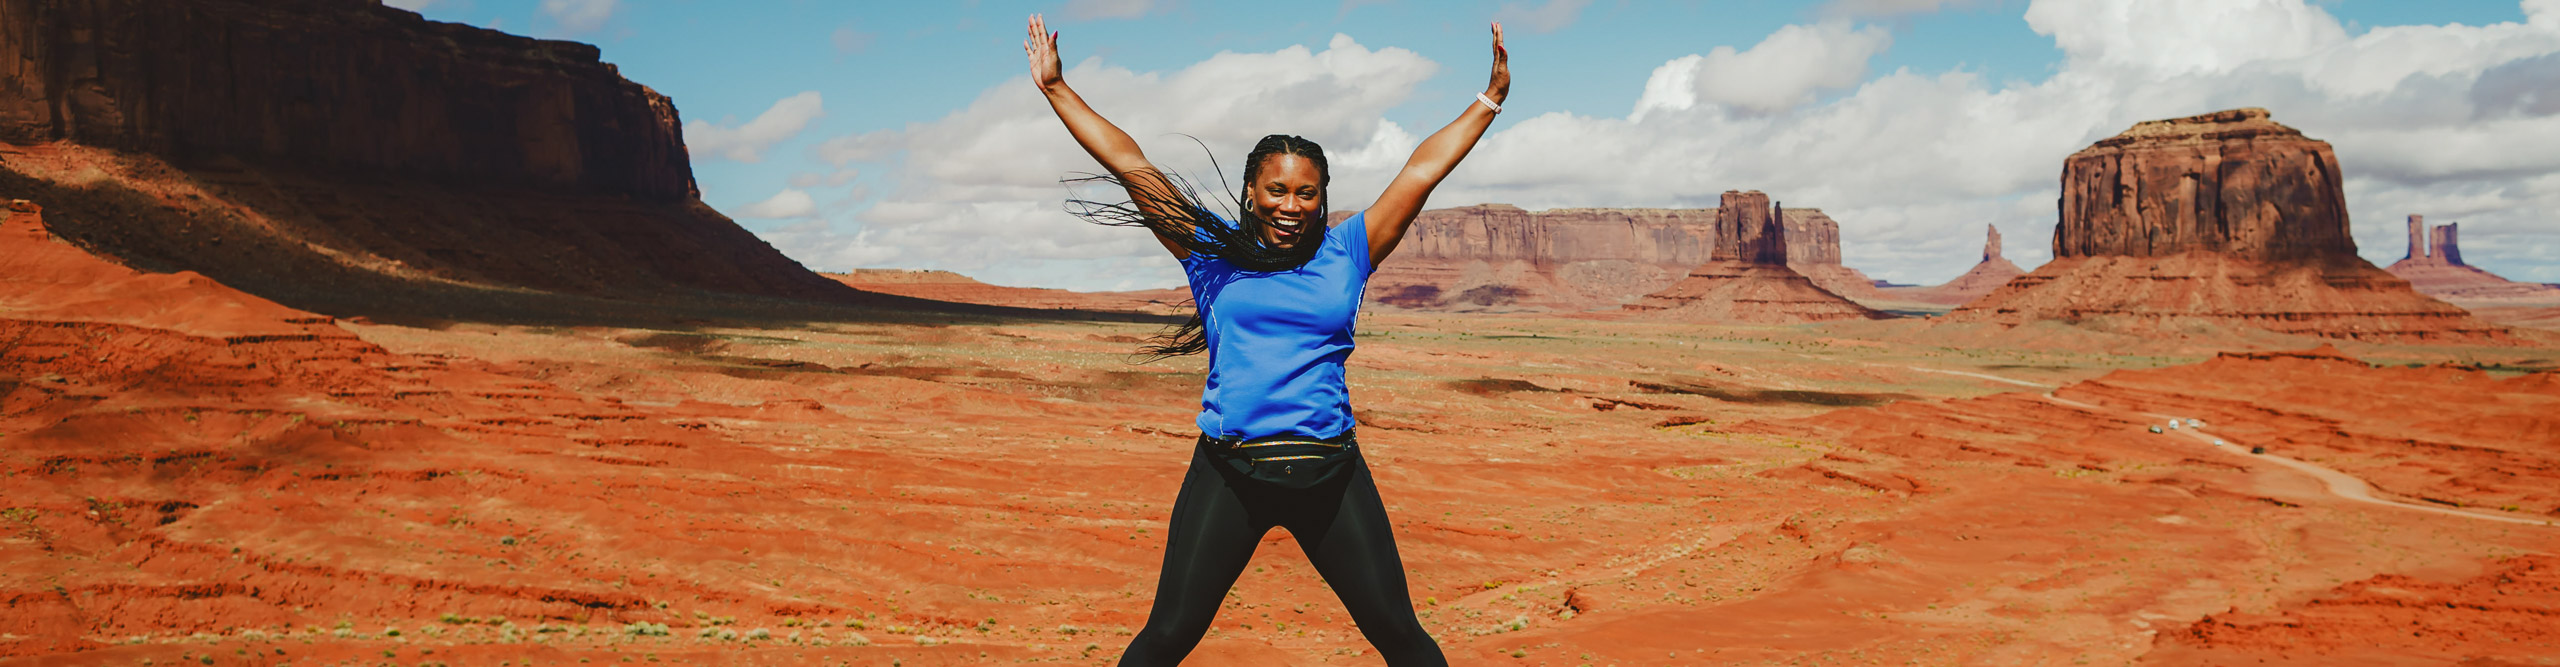 Woman jumping with arms outstretched in the middle of Monument Valley, Arizona, USA